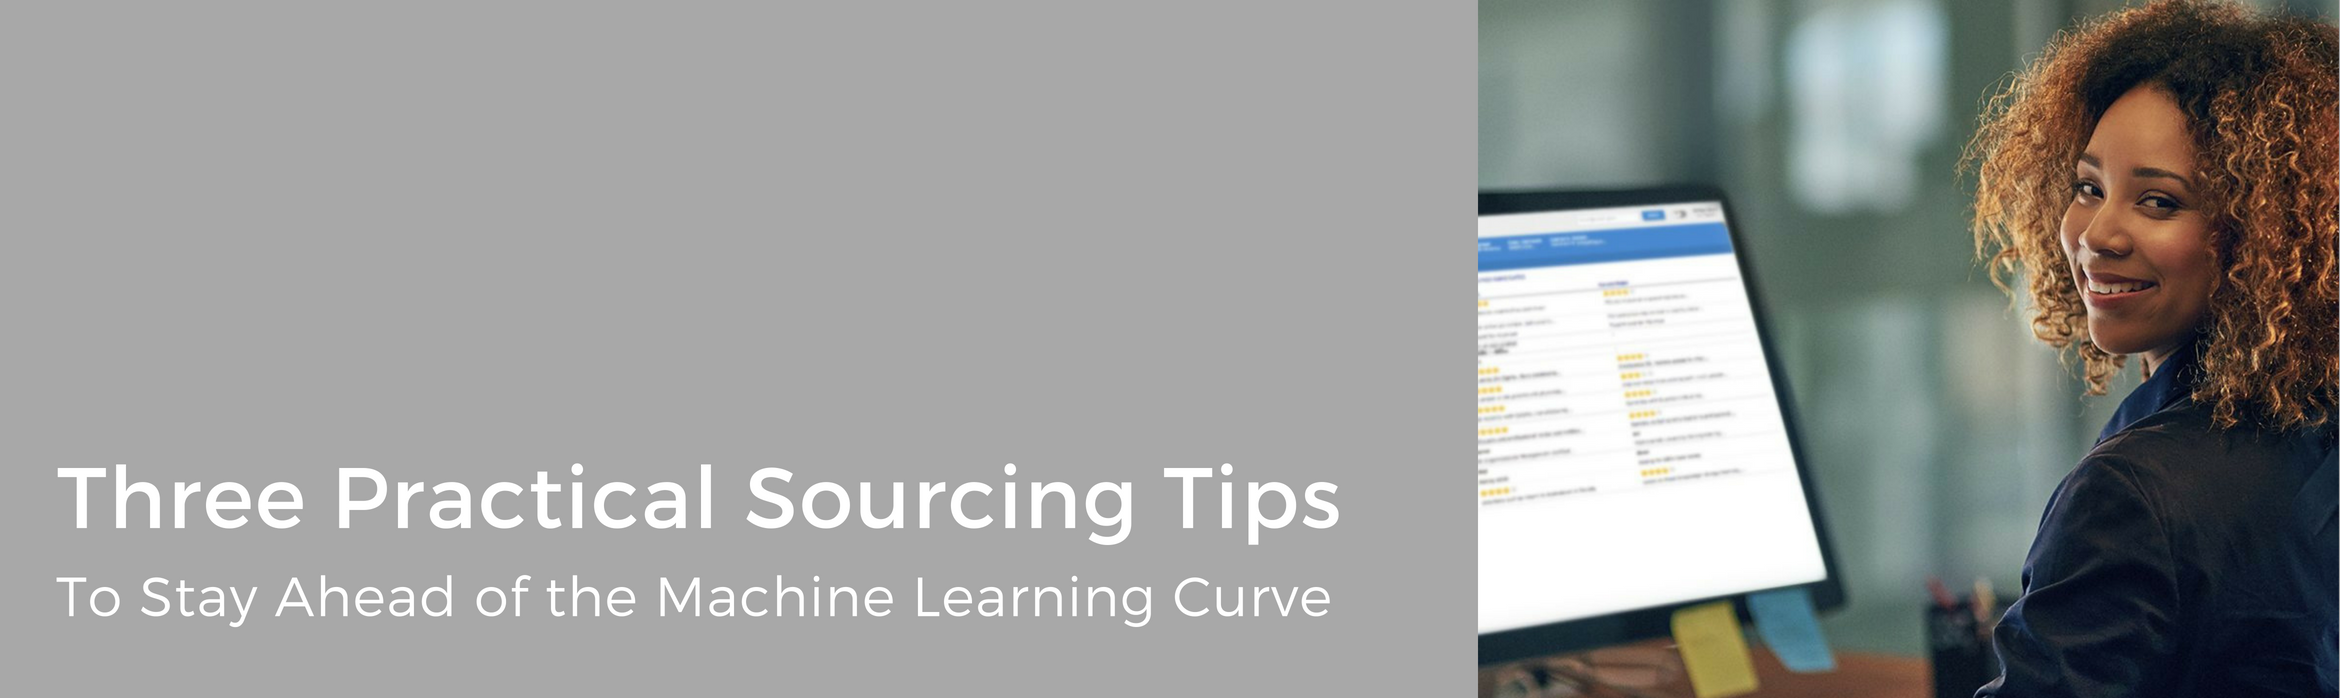 Three Practical Sourcing Tips To Stay Ahead of the Machine Learning Curve